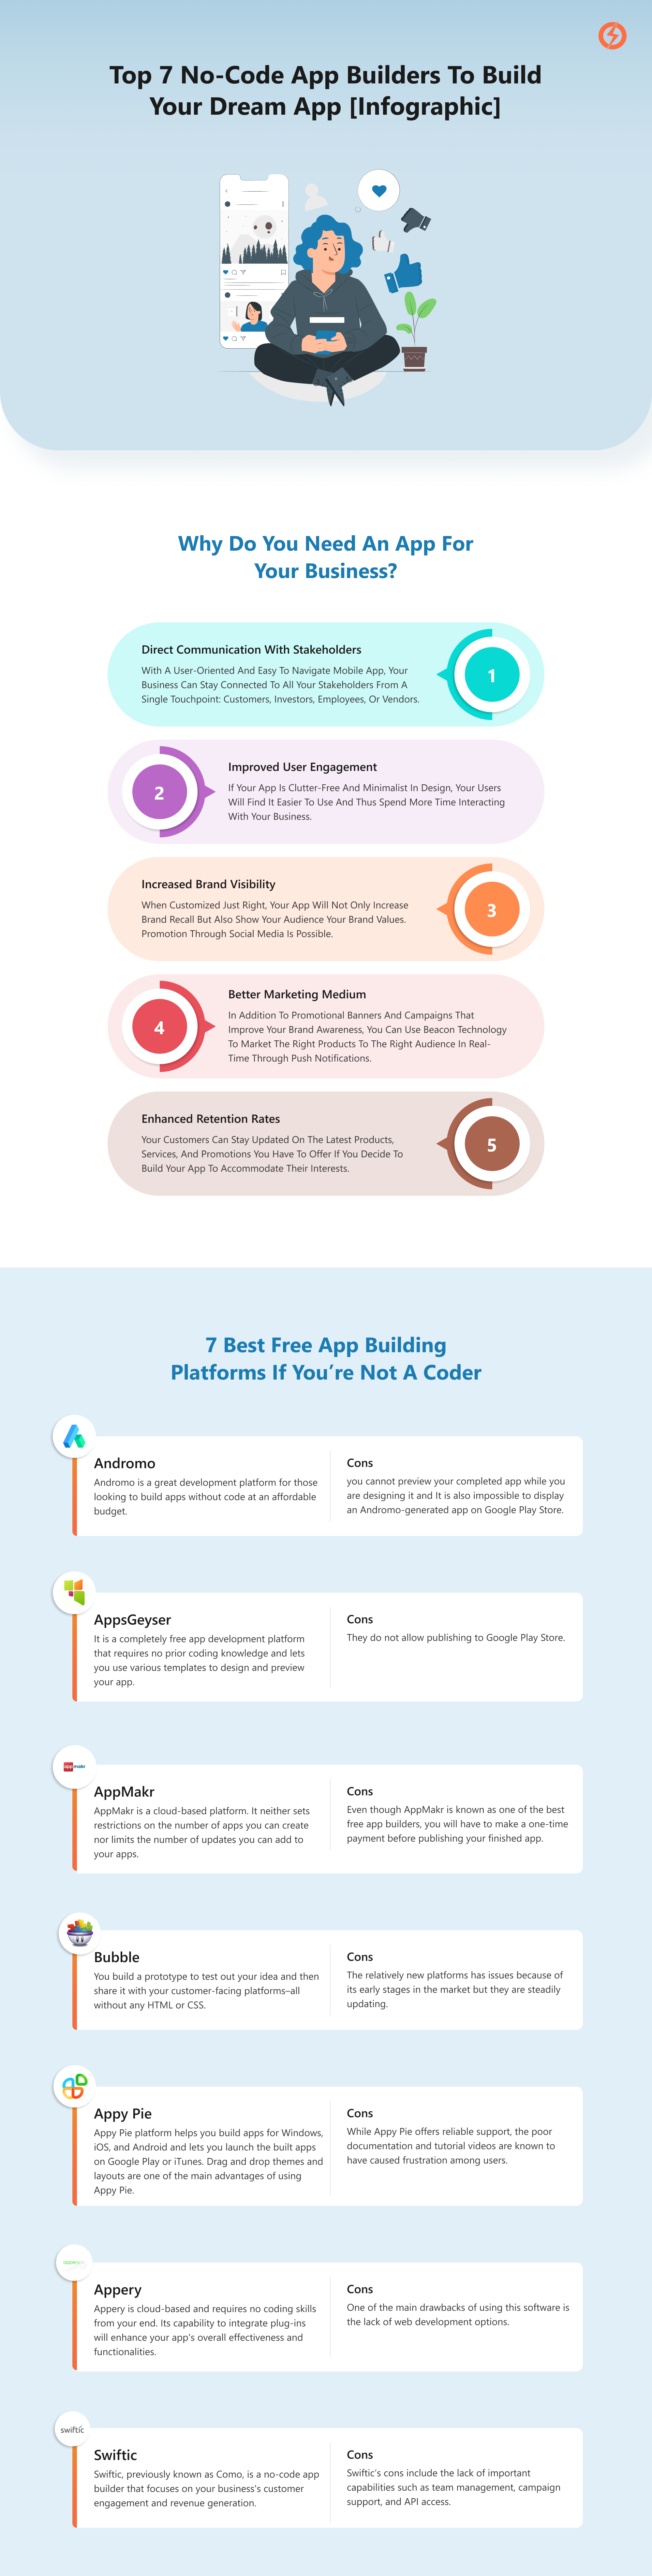 app building tools infographic